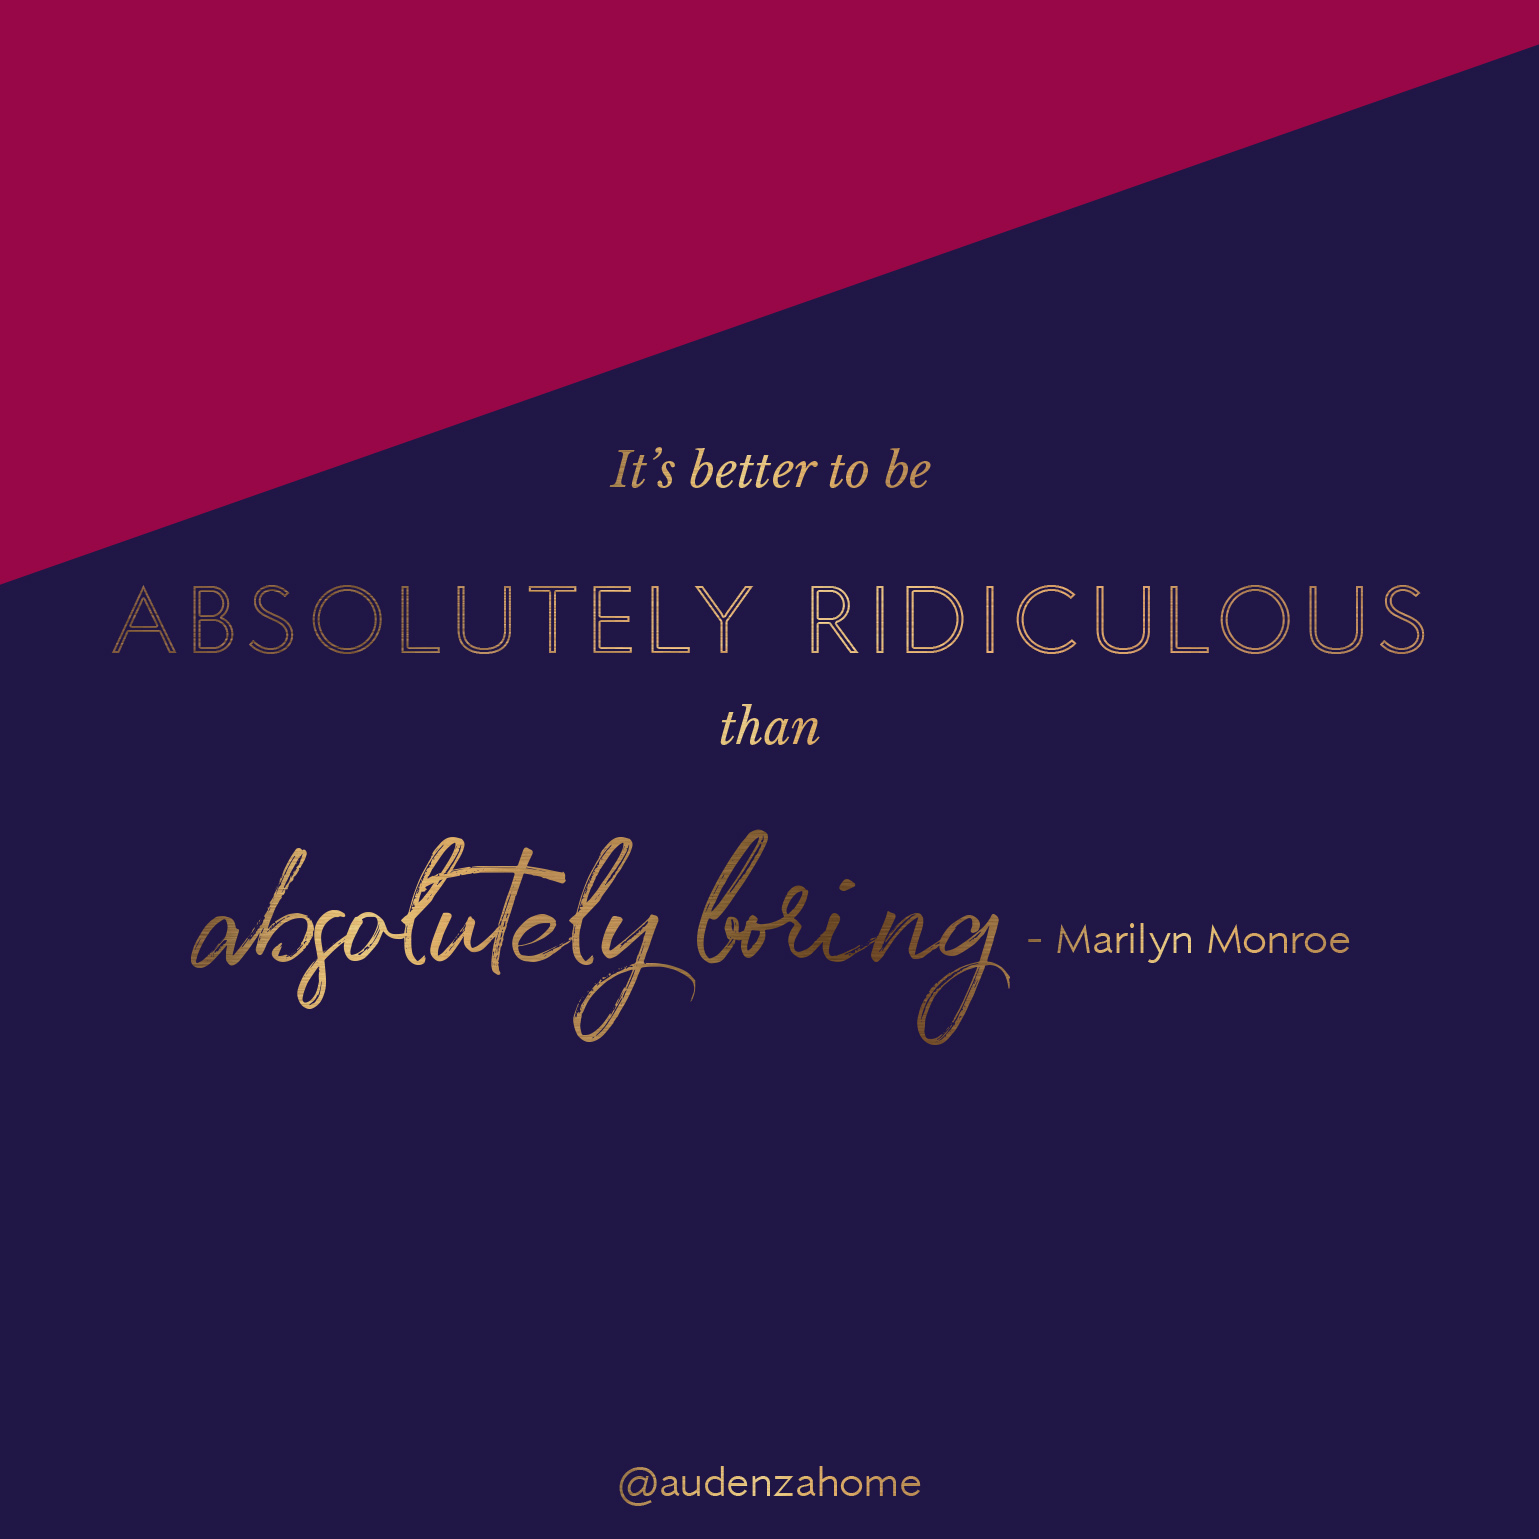 It's better to be absolutely ridiculous than absolutely boring! - Marilyn Monroe